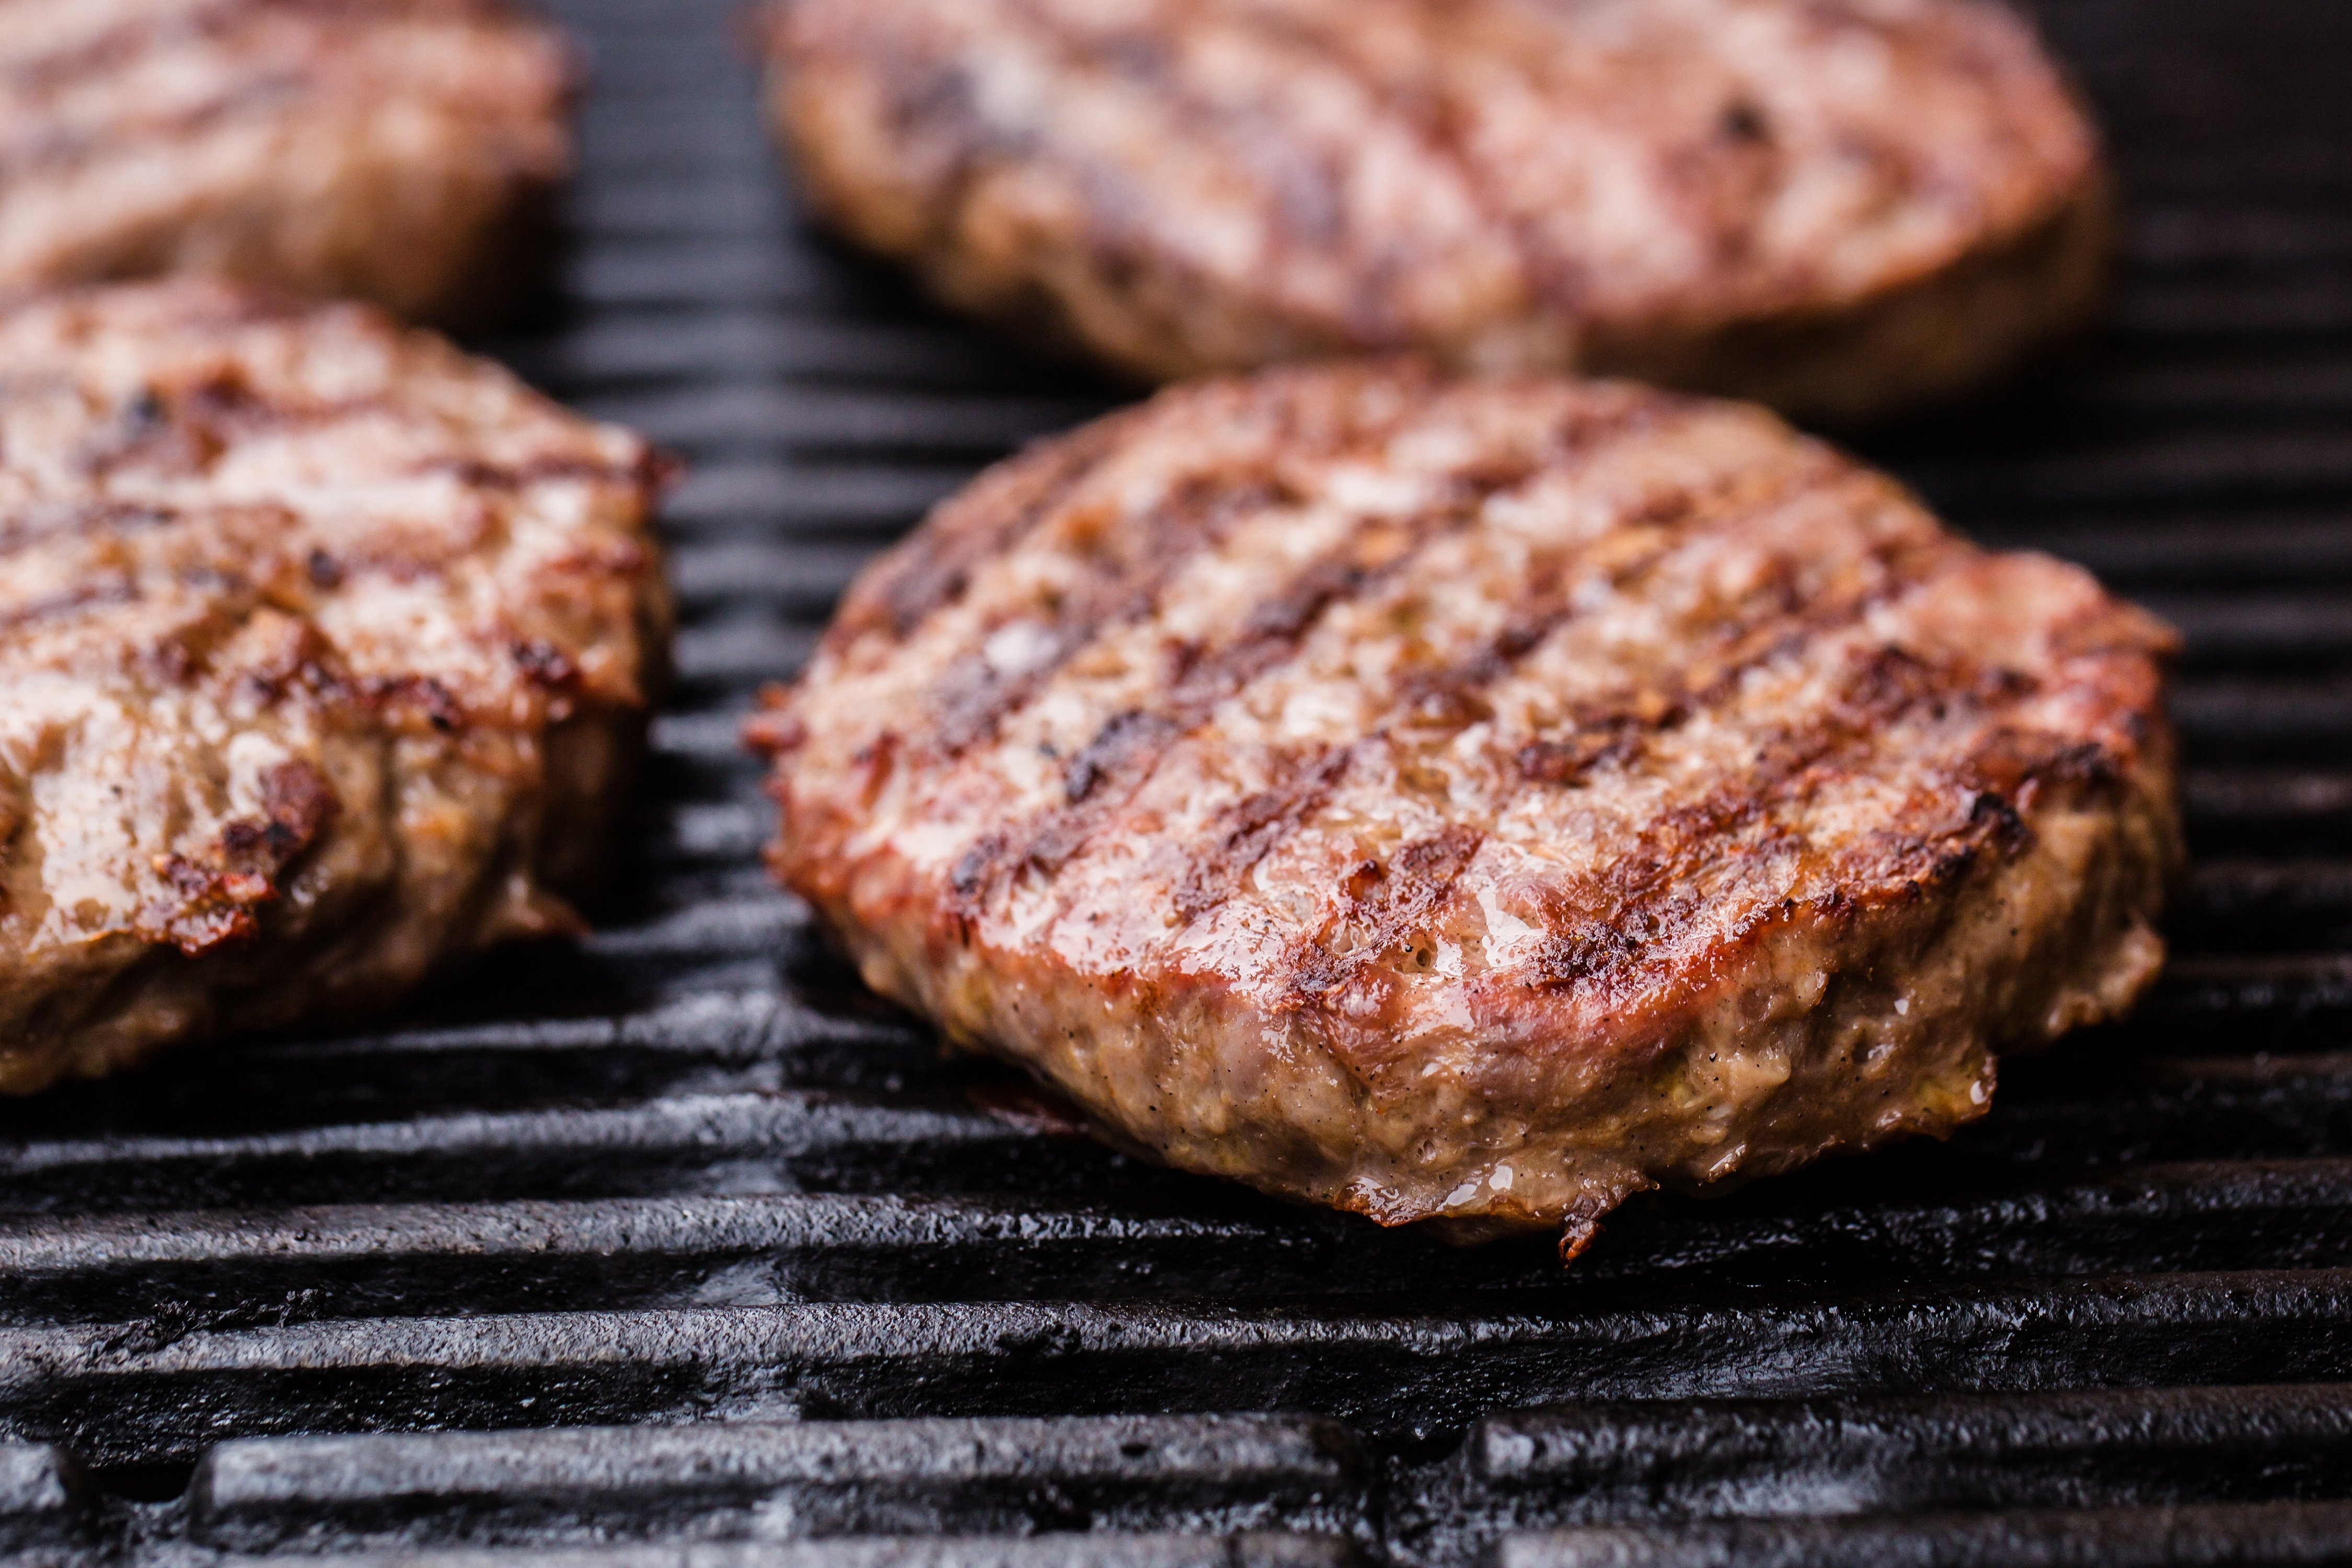 Patties cook on a grill. Shutterstock image via user x4wiz